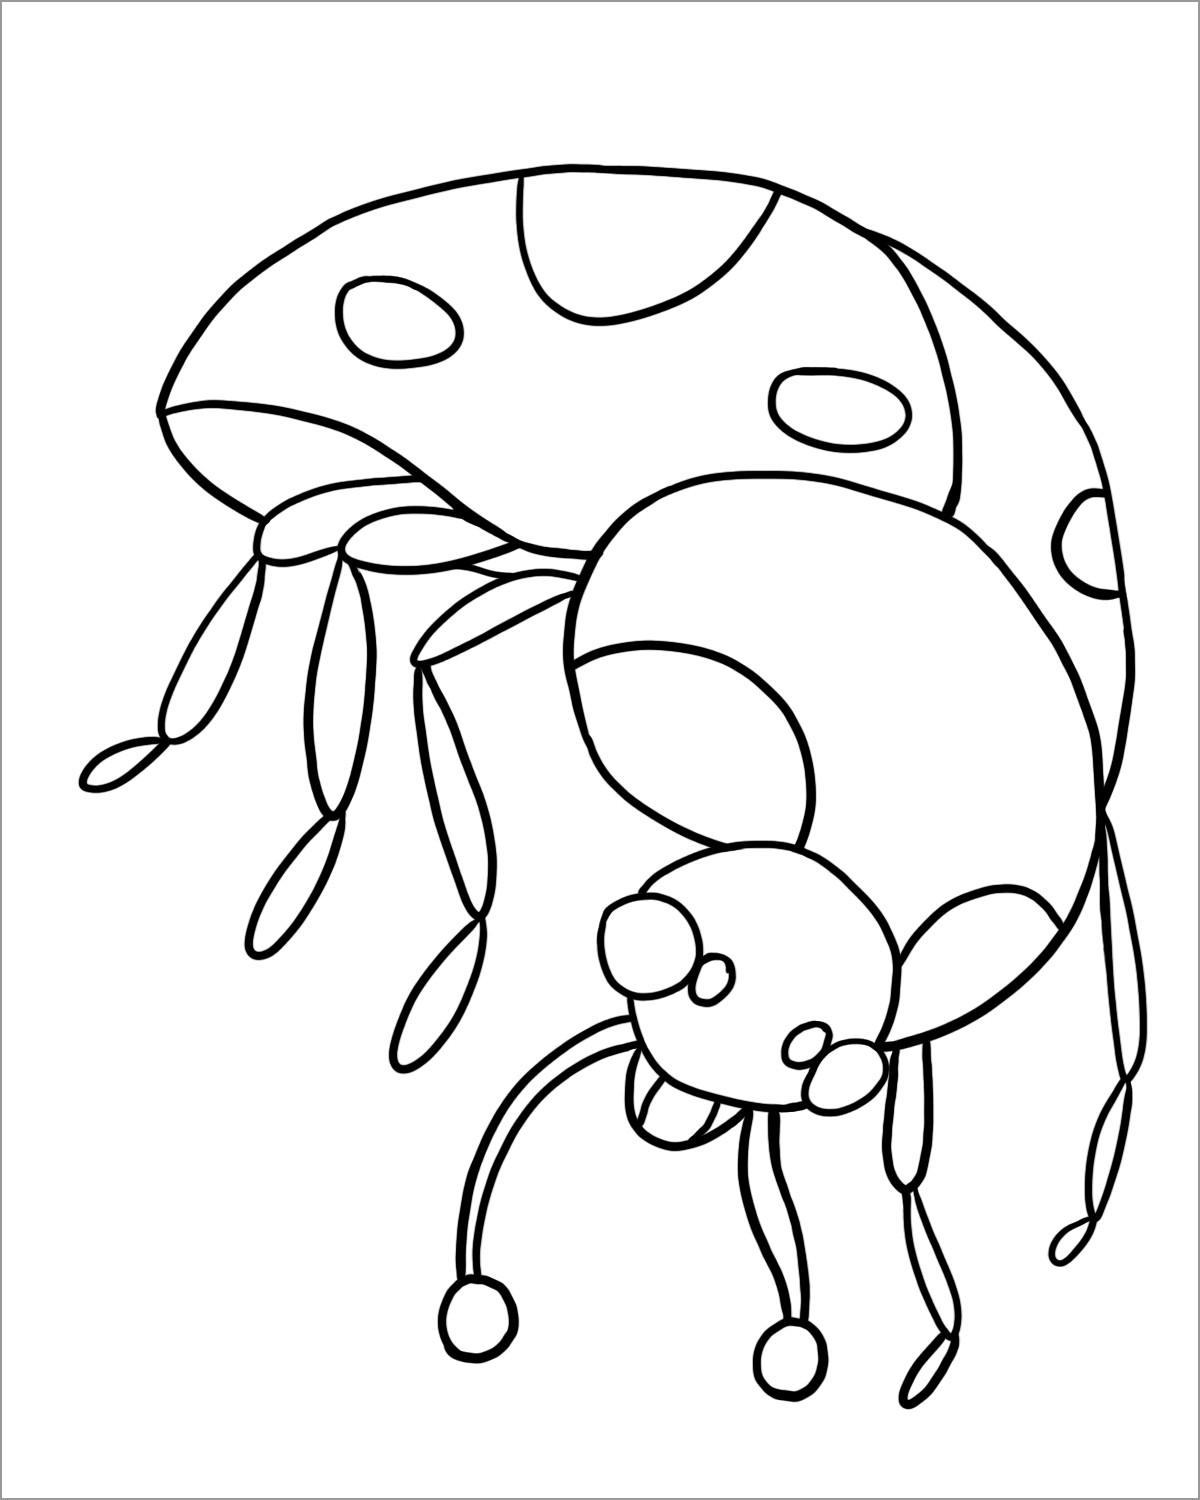 Ladybug Coloring Page for Adults